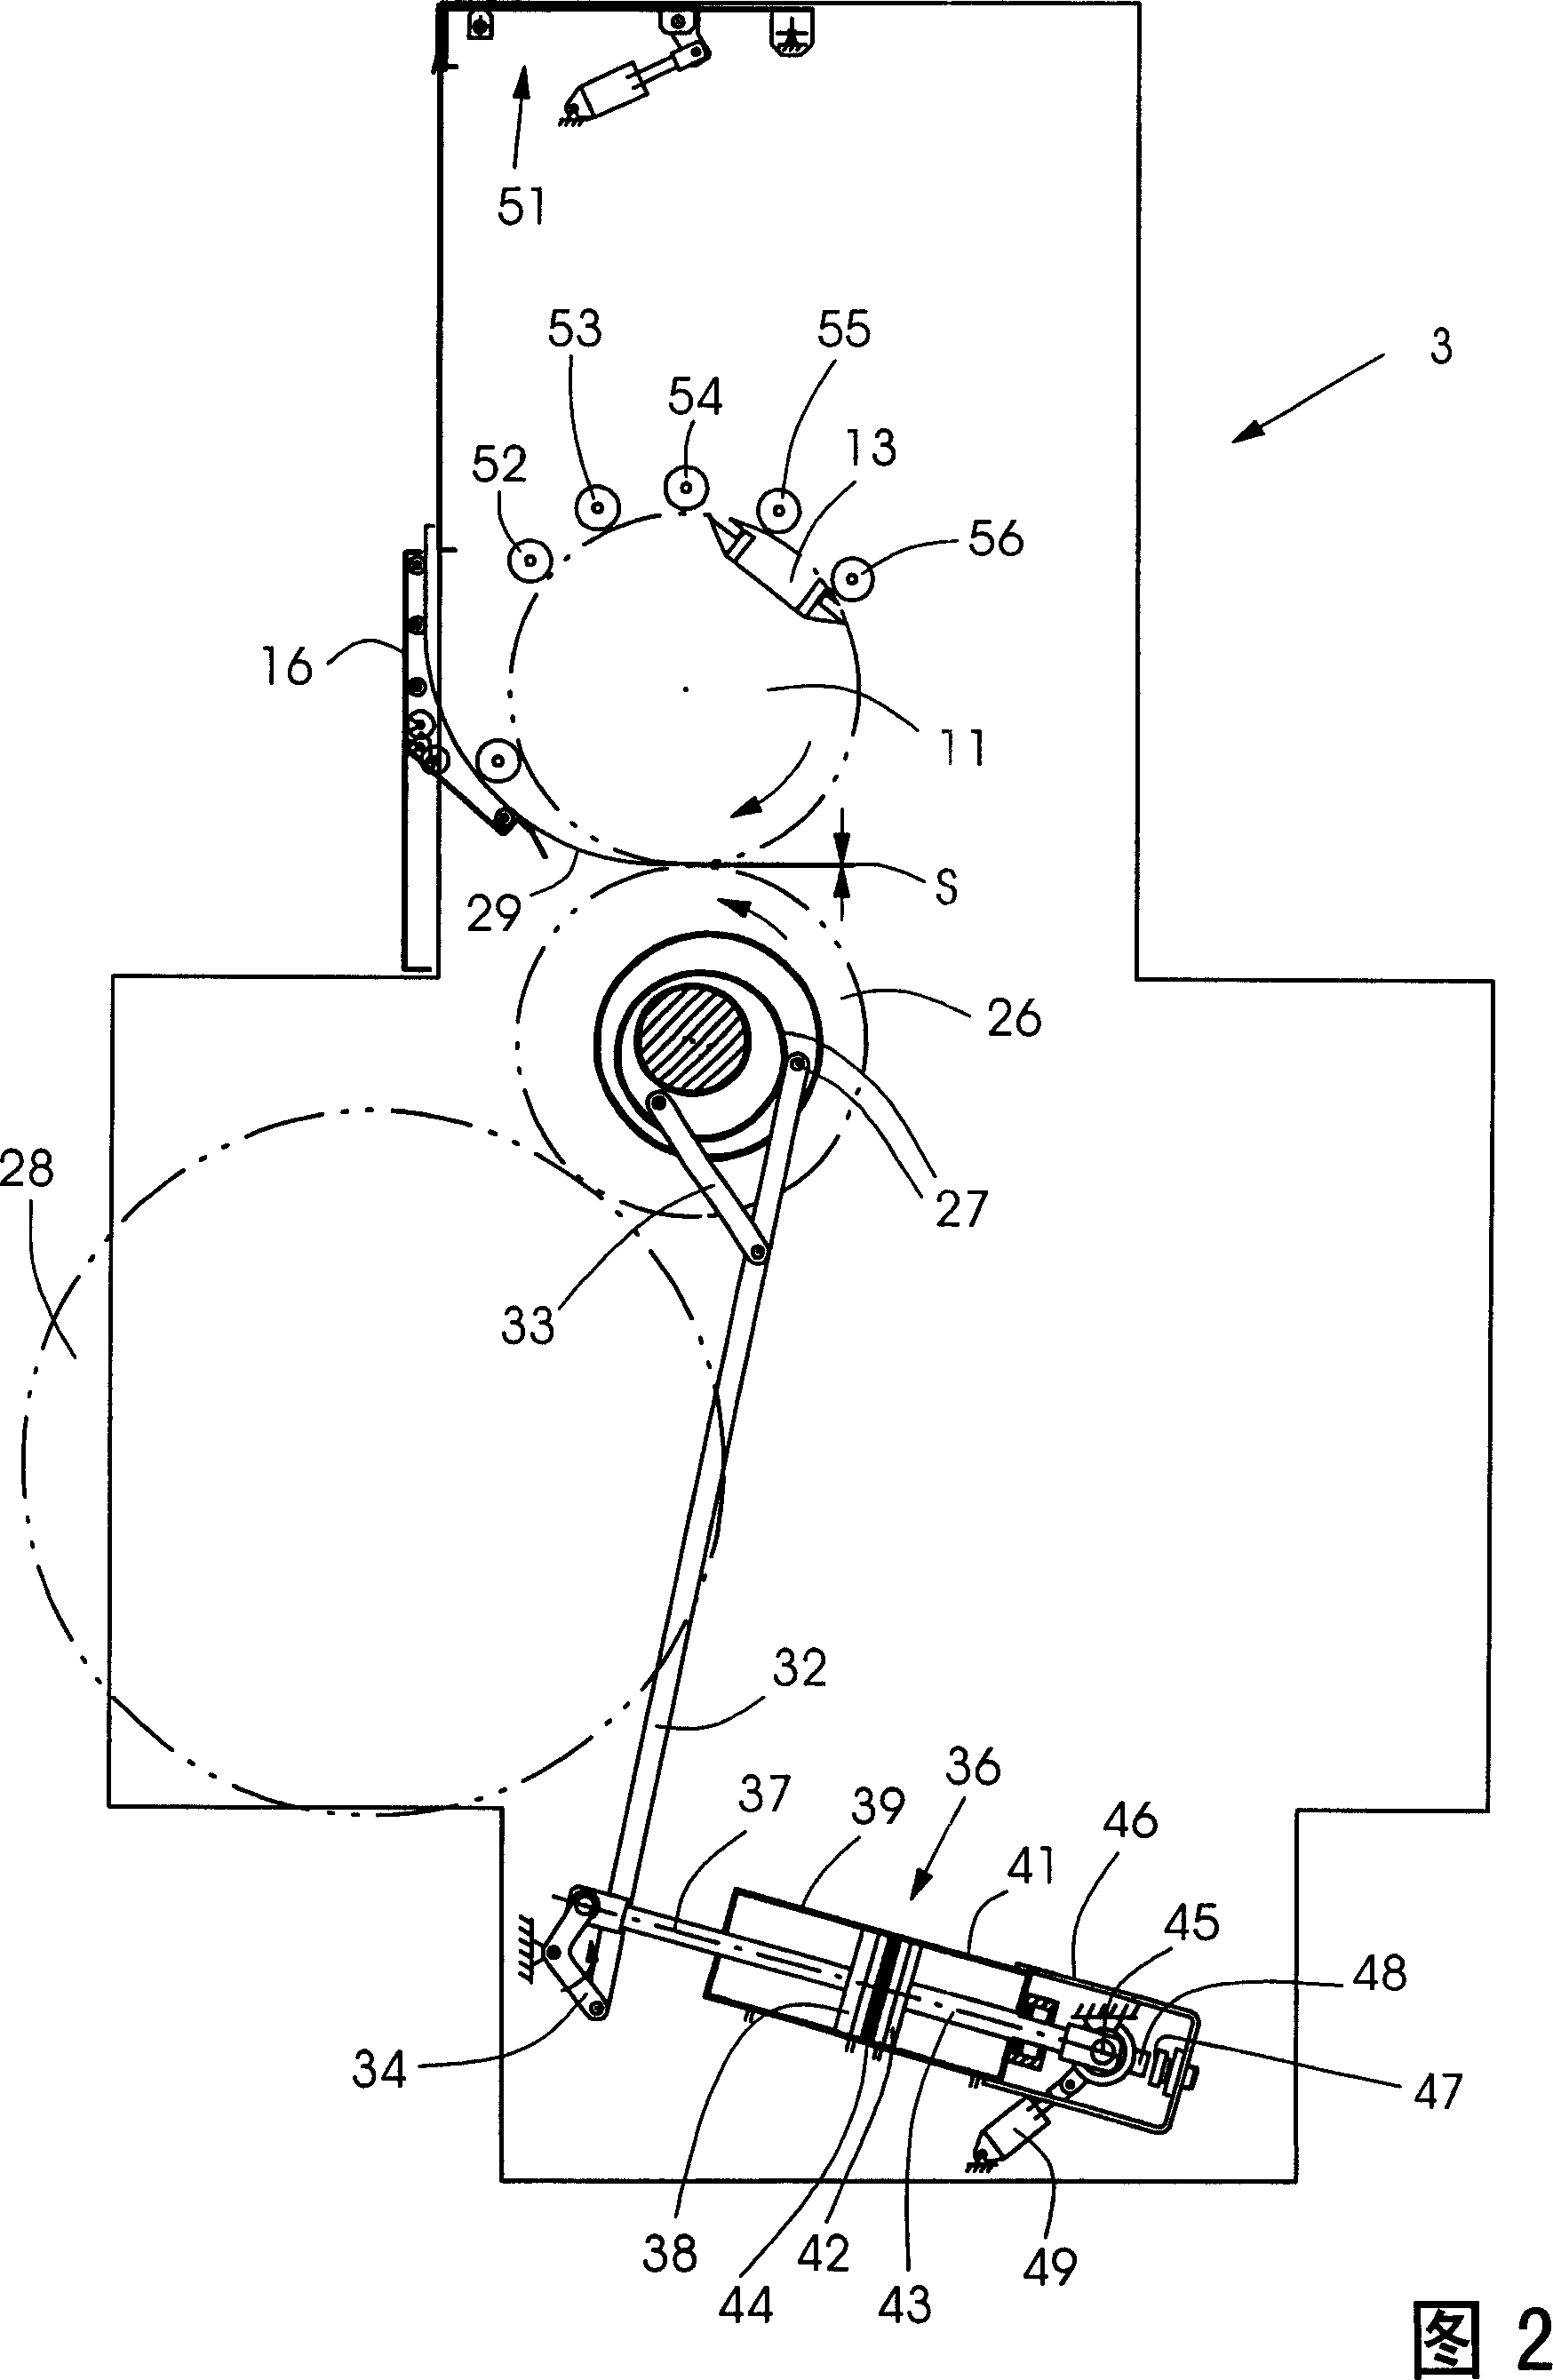 Method and apparatus for the transport of printing plates